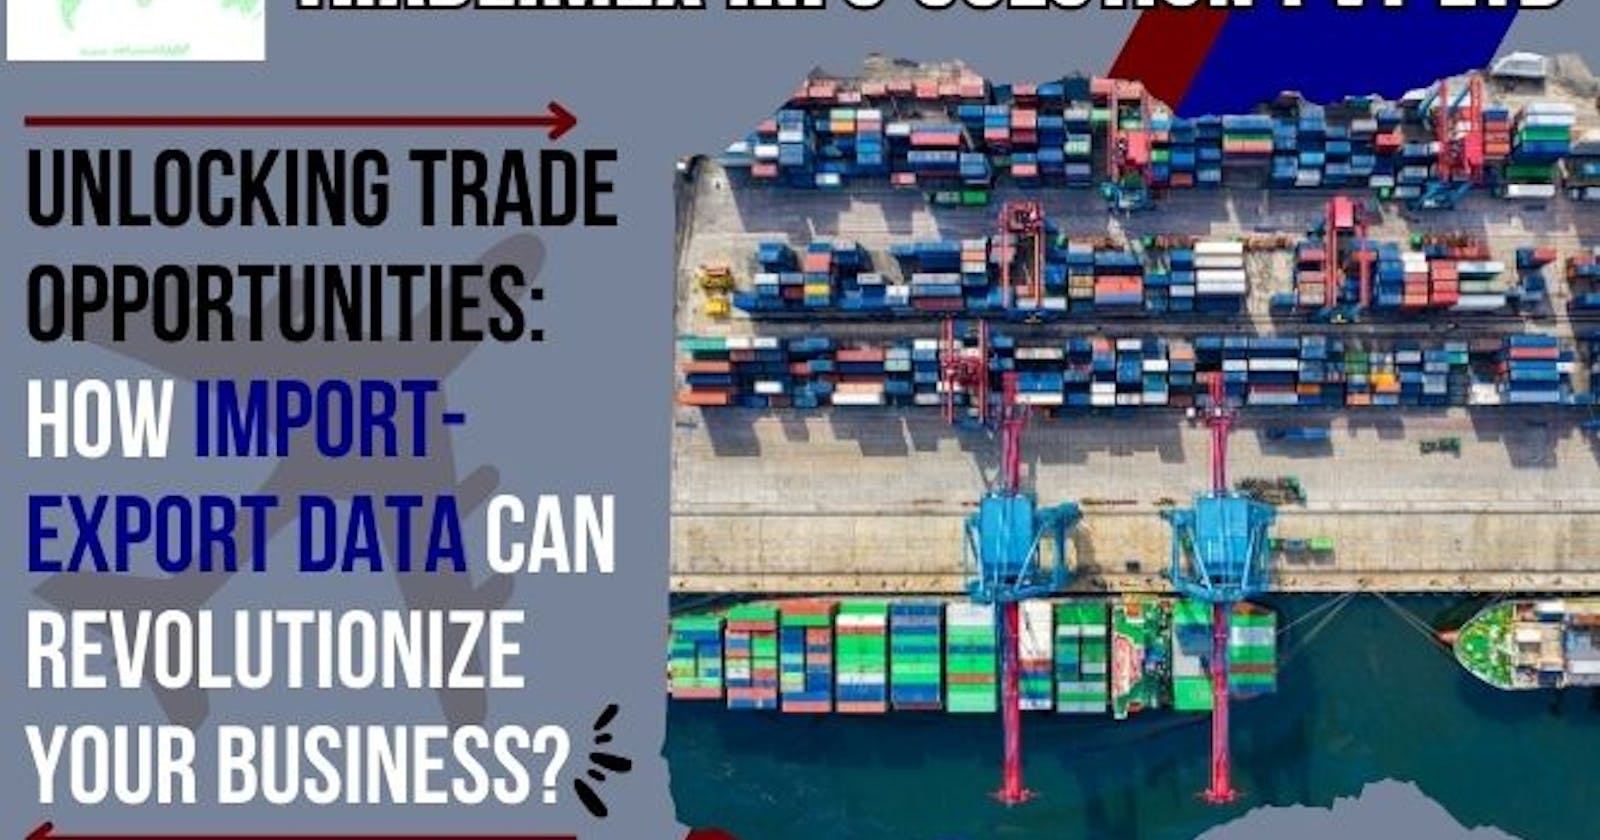 Unlocking Trade Opportunities: How Import-export Data Can Revolutionize Your Business